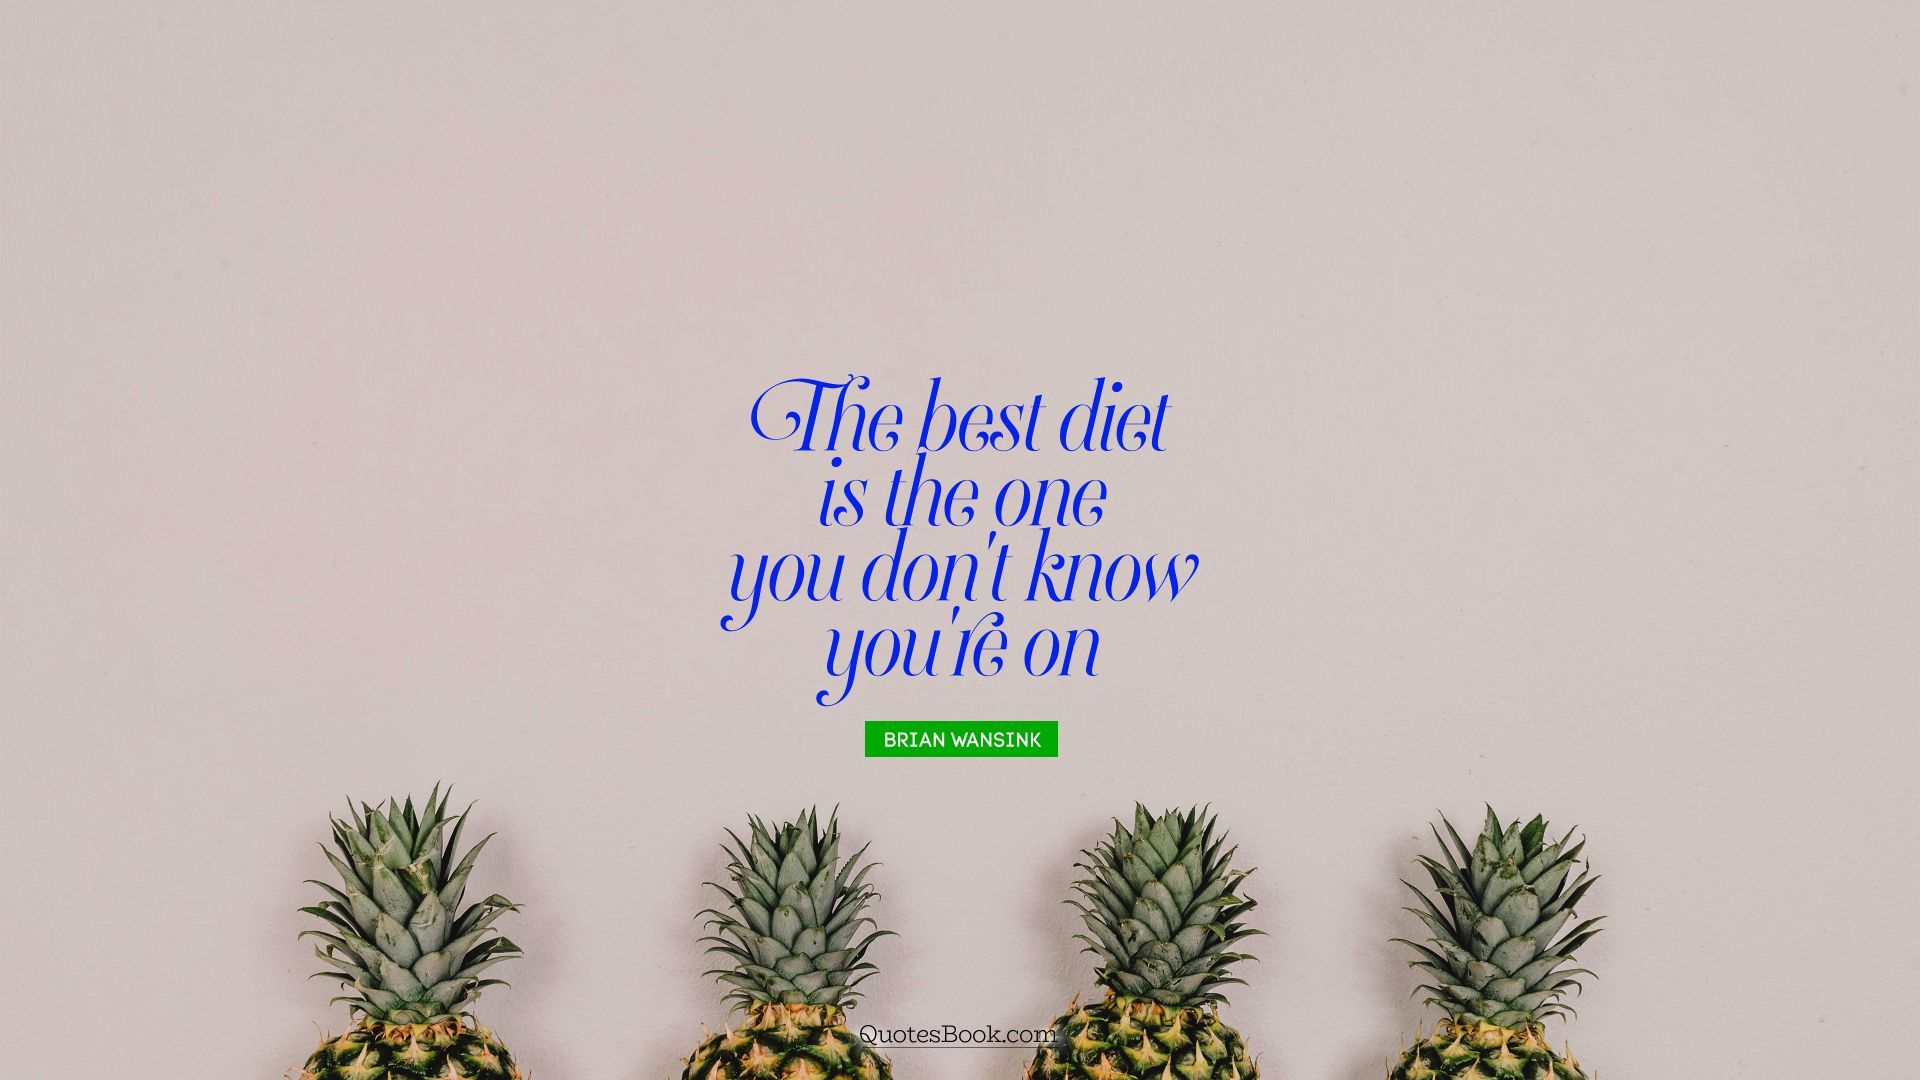 The best diet is the one you don't know you're on. - Quote by Brian Wansink